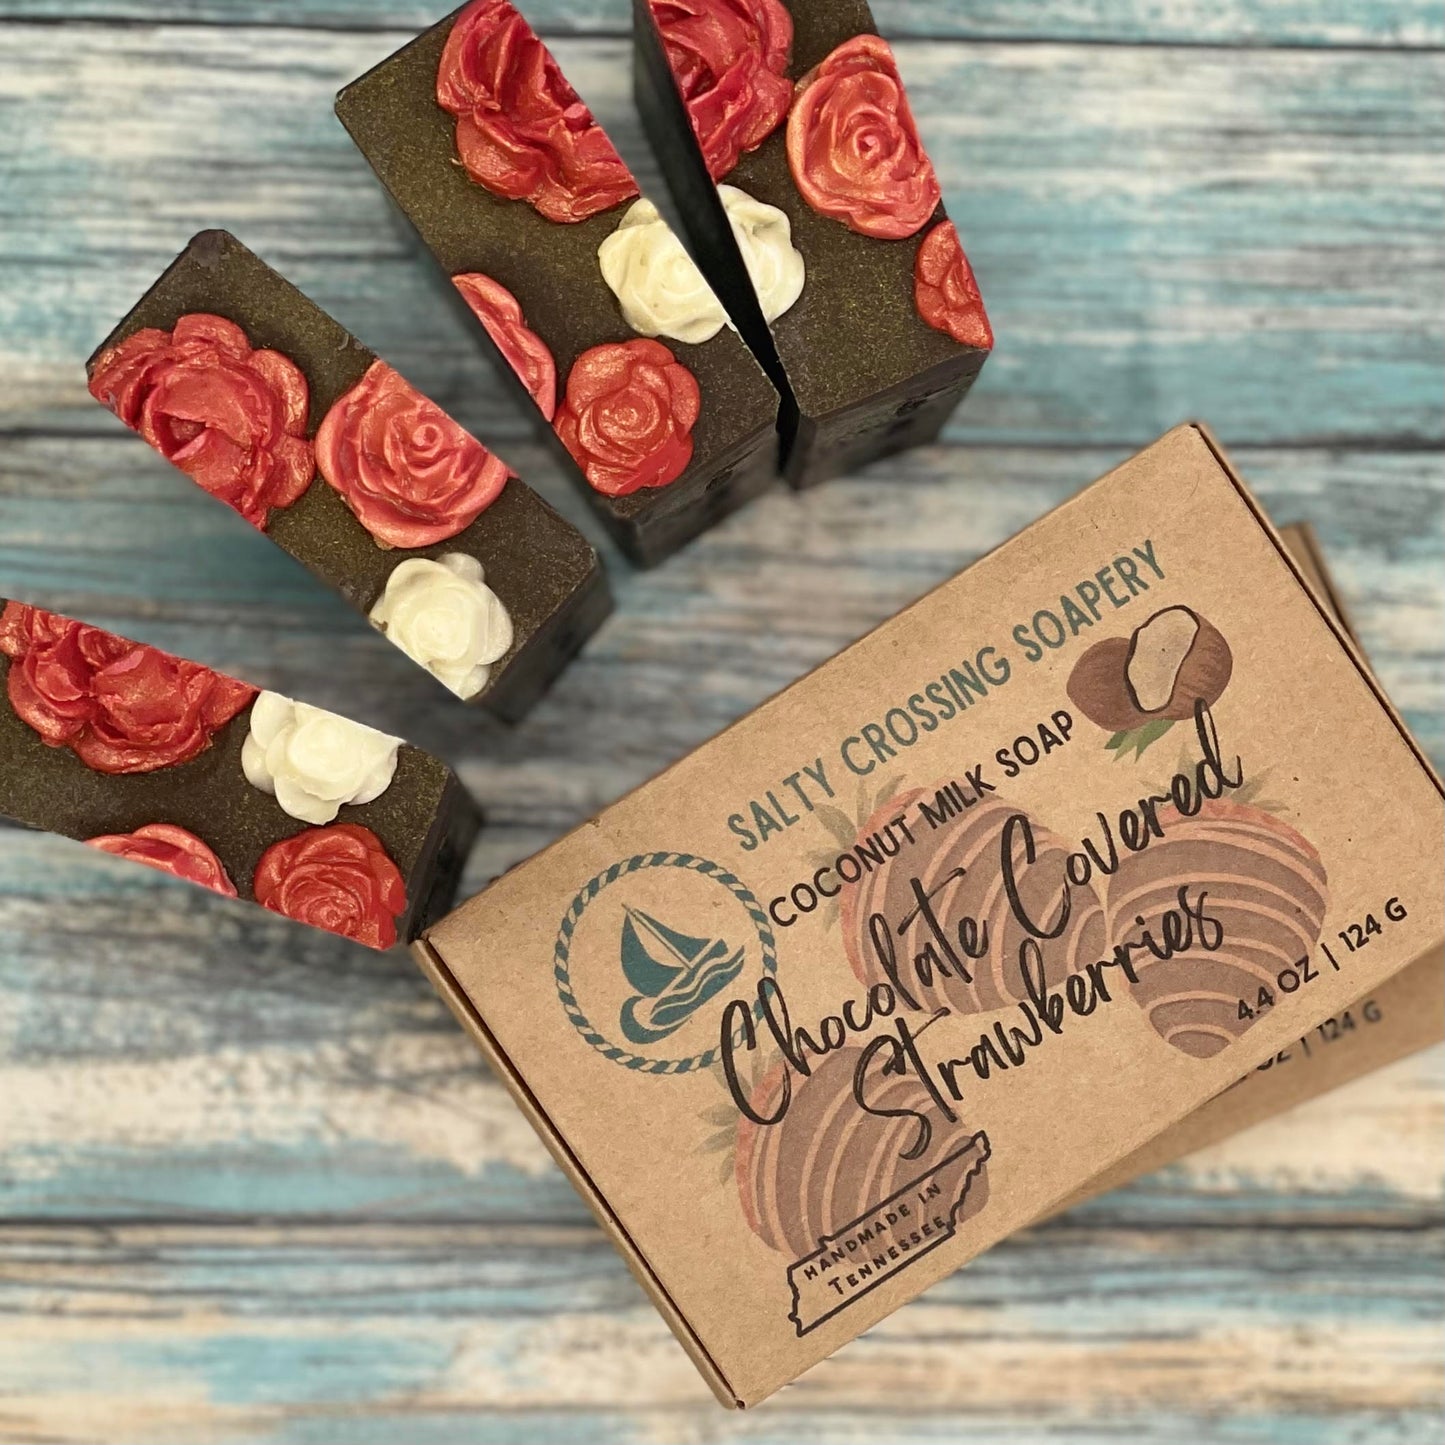 Chocolate Covered Strawberries Soap | Handmade Fancy Artisan Bar with Coconut Milk & Shea Butter | Valentine's or Galentine's Gift